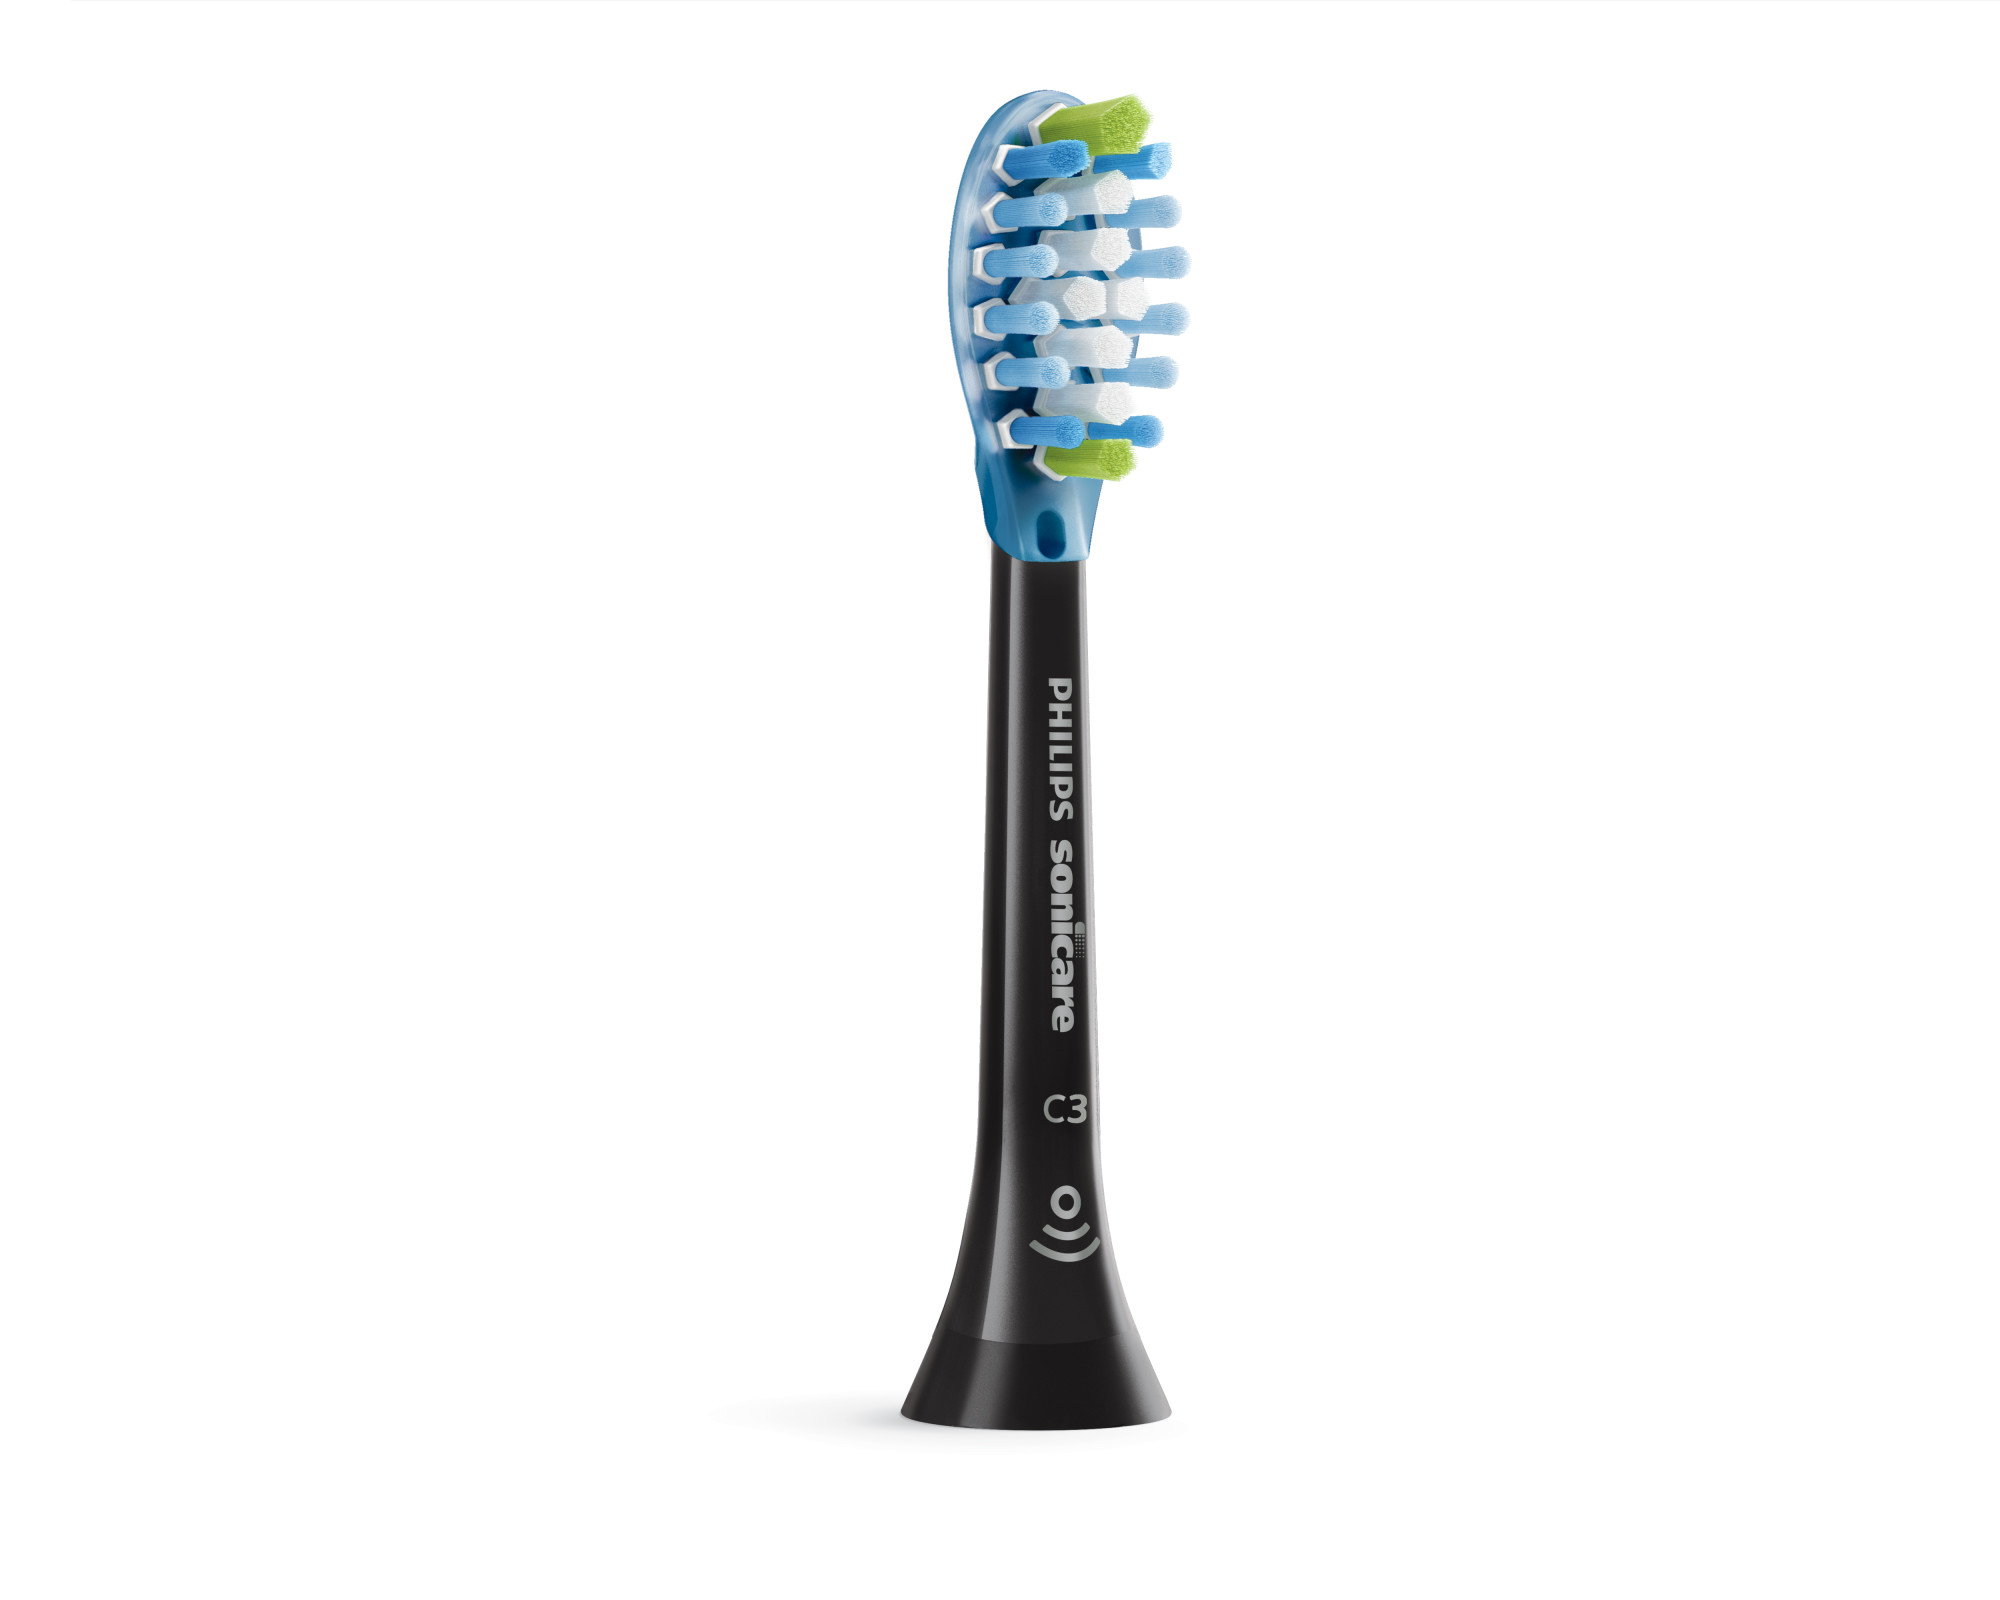 Philips Sonicare ExpertClean 7300, Rechargeable Electric Toothbrush, Black HX9610/17 - image 13 of 19